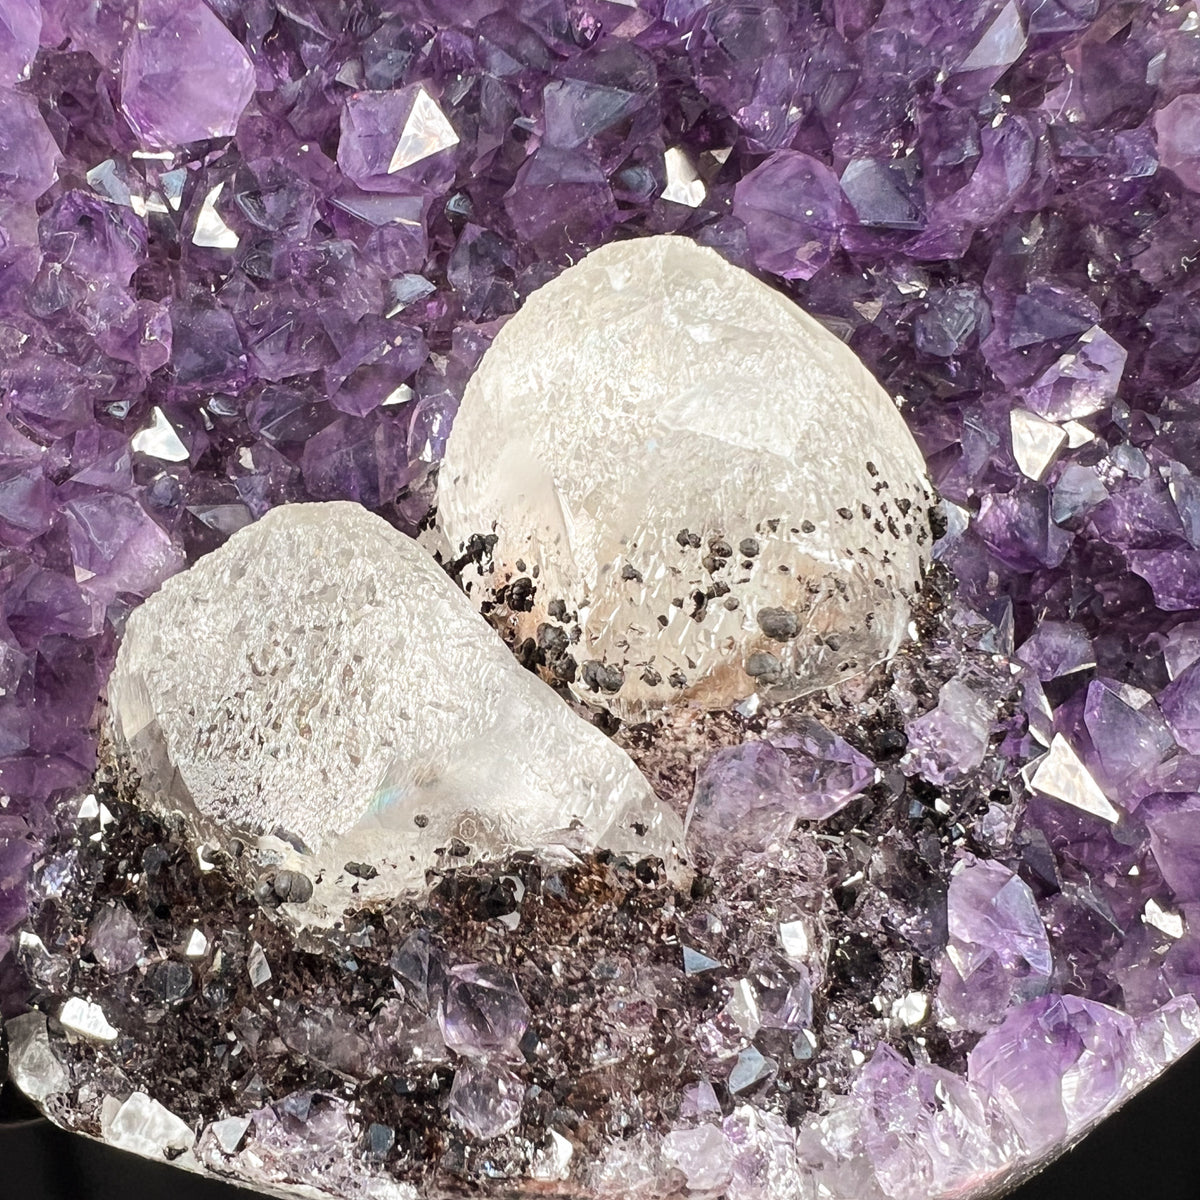 Close Up of Hematite Crystals Coating Calcite inside Amethyst Geode